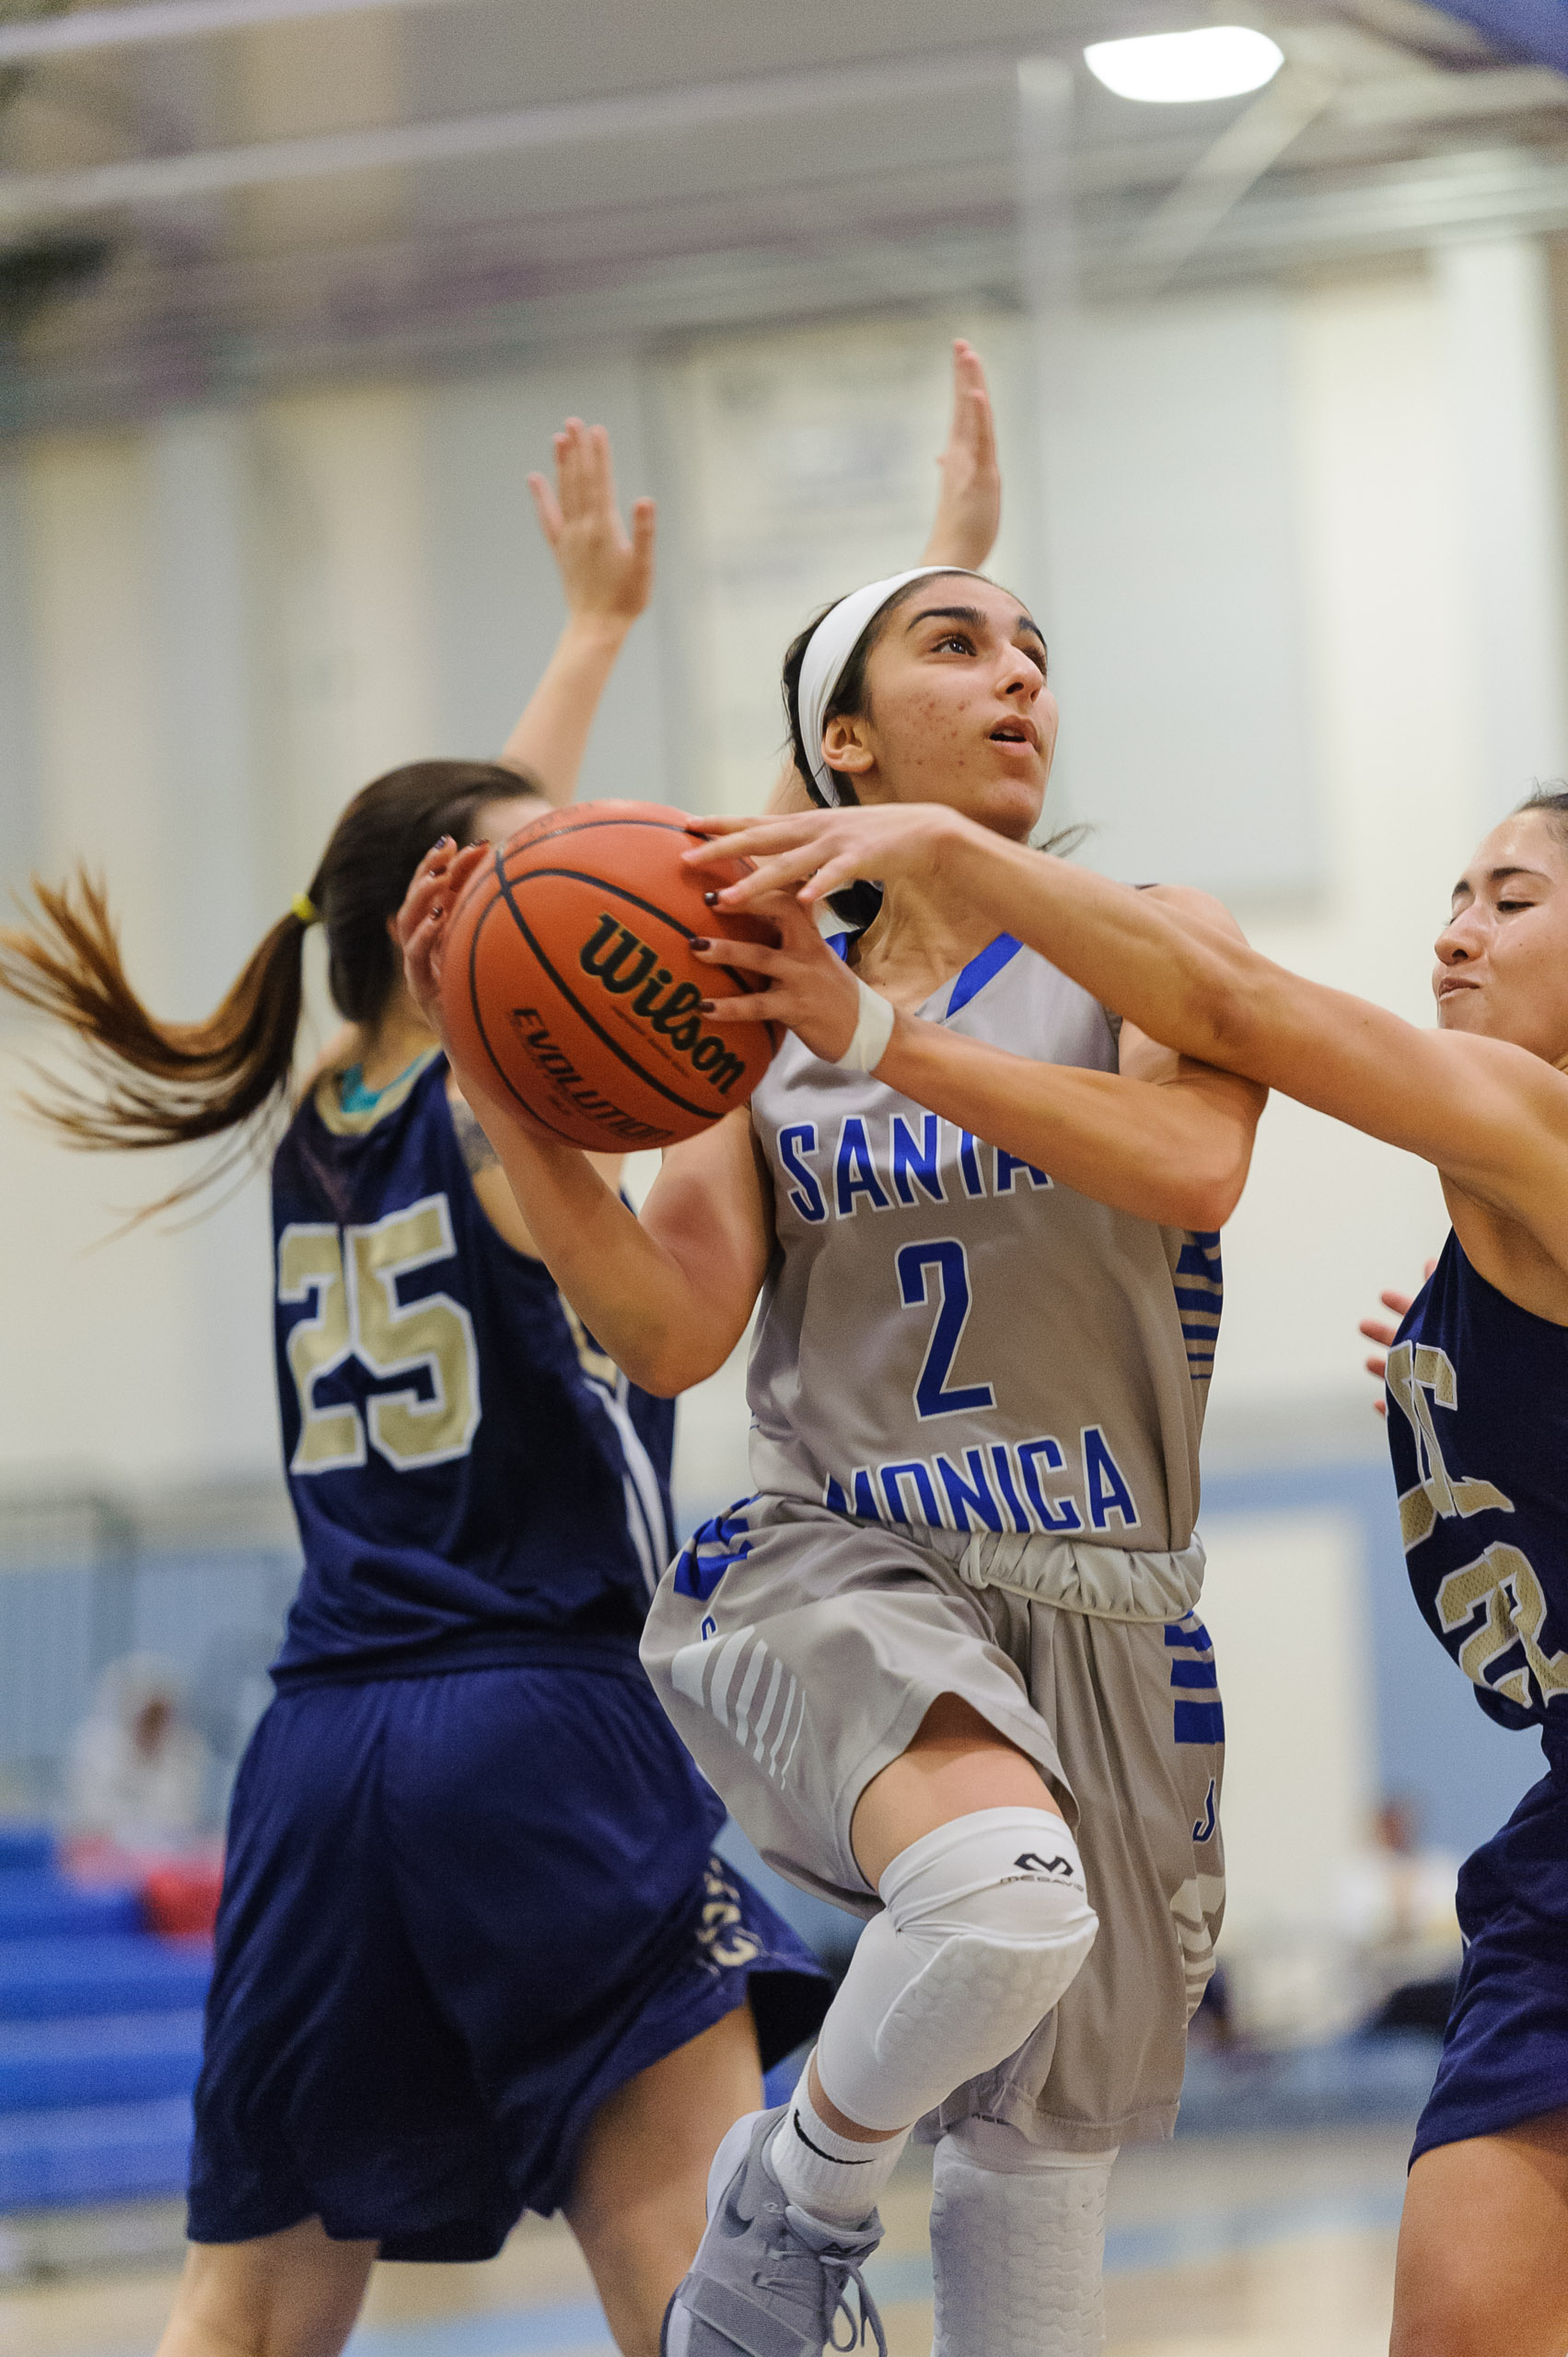  Guard Jessica Melamed (2,Middle) of Santa Monica College goes up for a layup attempt as Alexis Orellana (22,Right) of the College of the Canyons attempts to strip the ball from Melamed. The Santa Monica College Corsairs lose the game 108-70 to the C